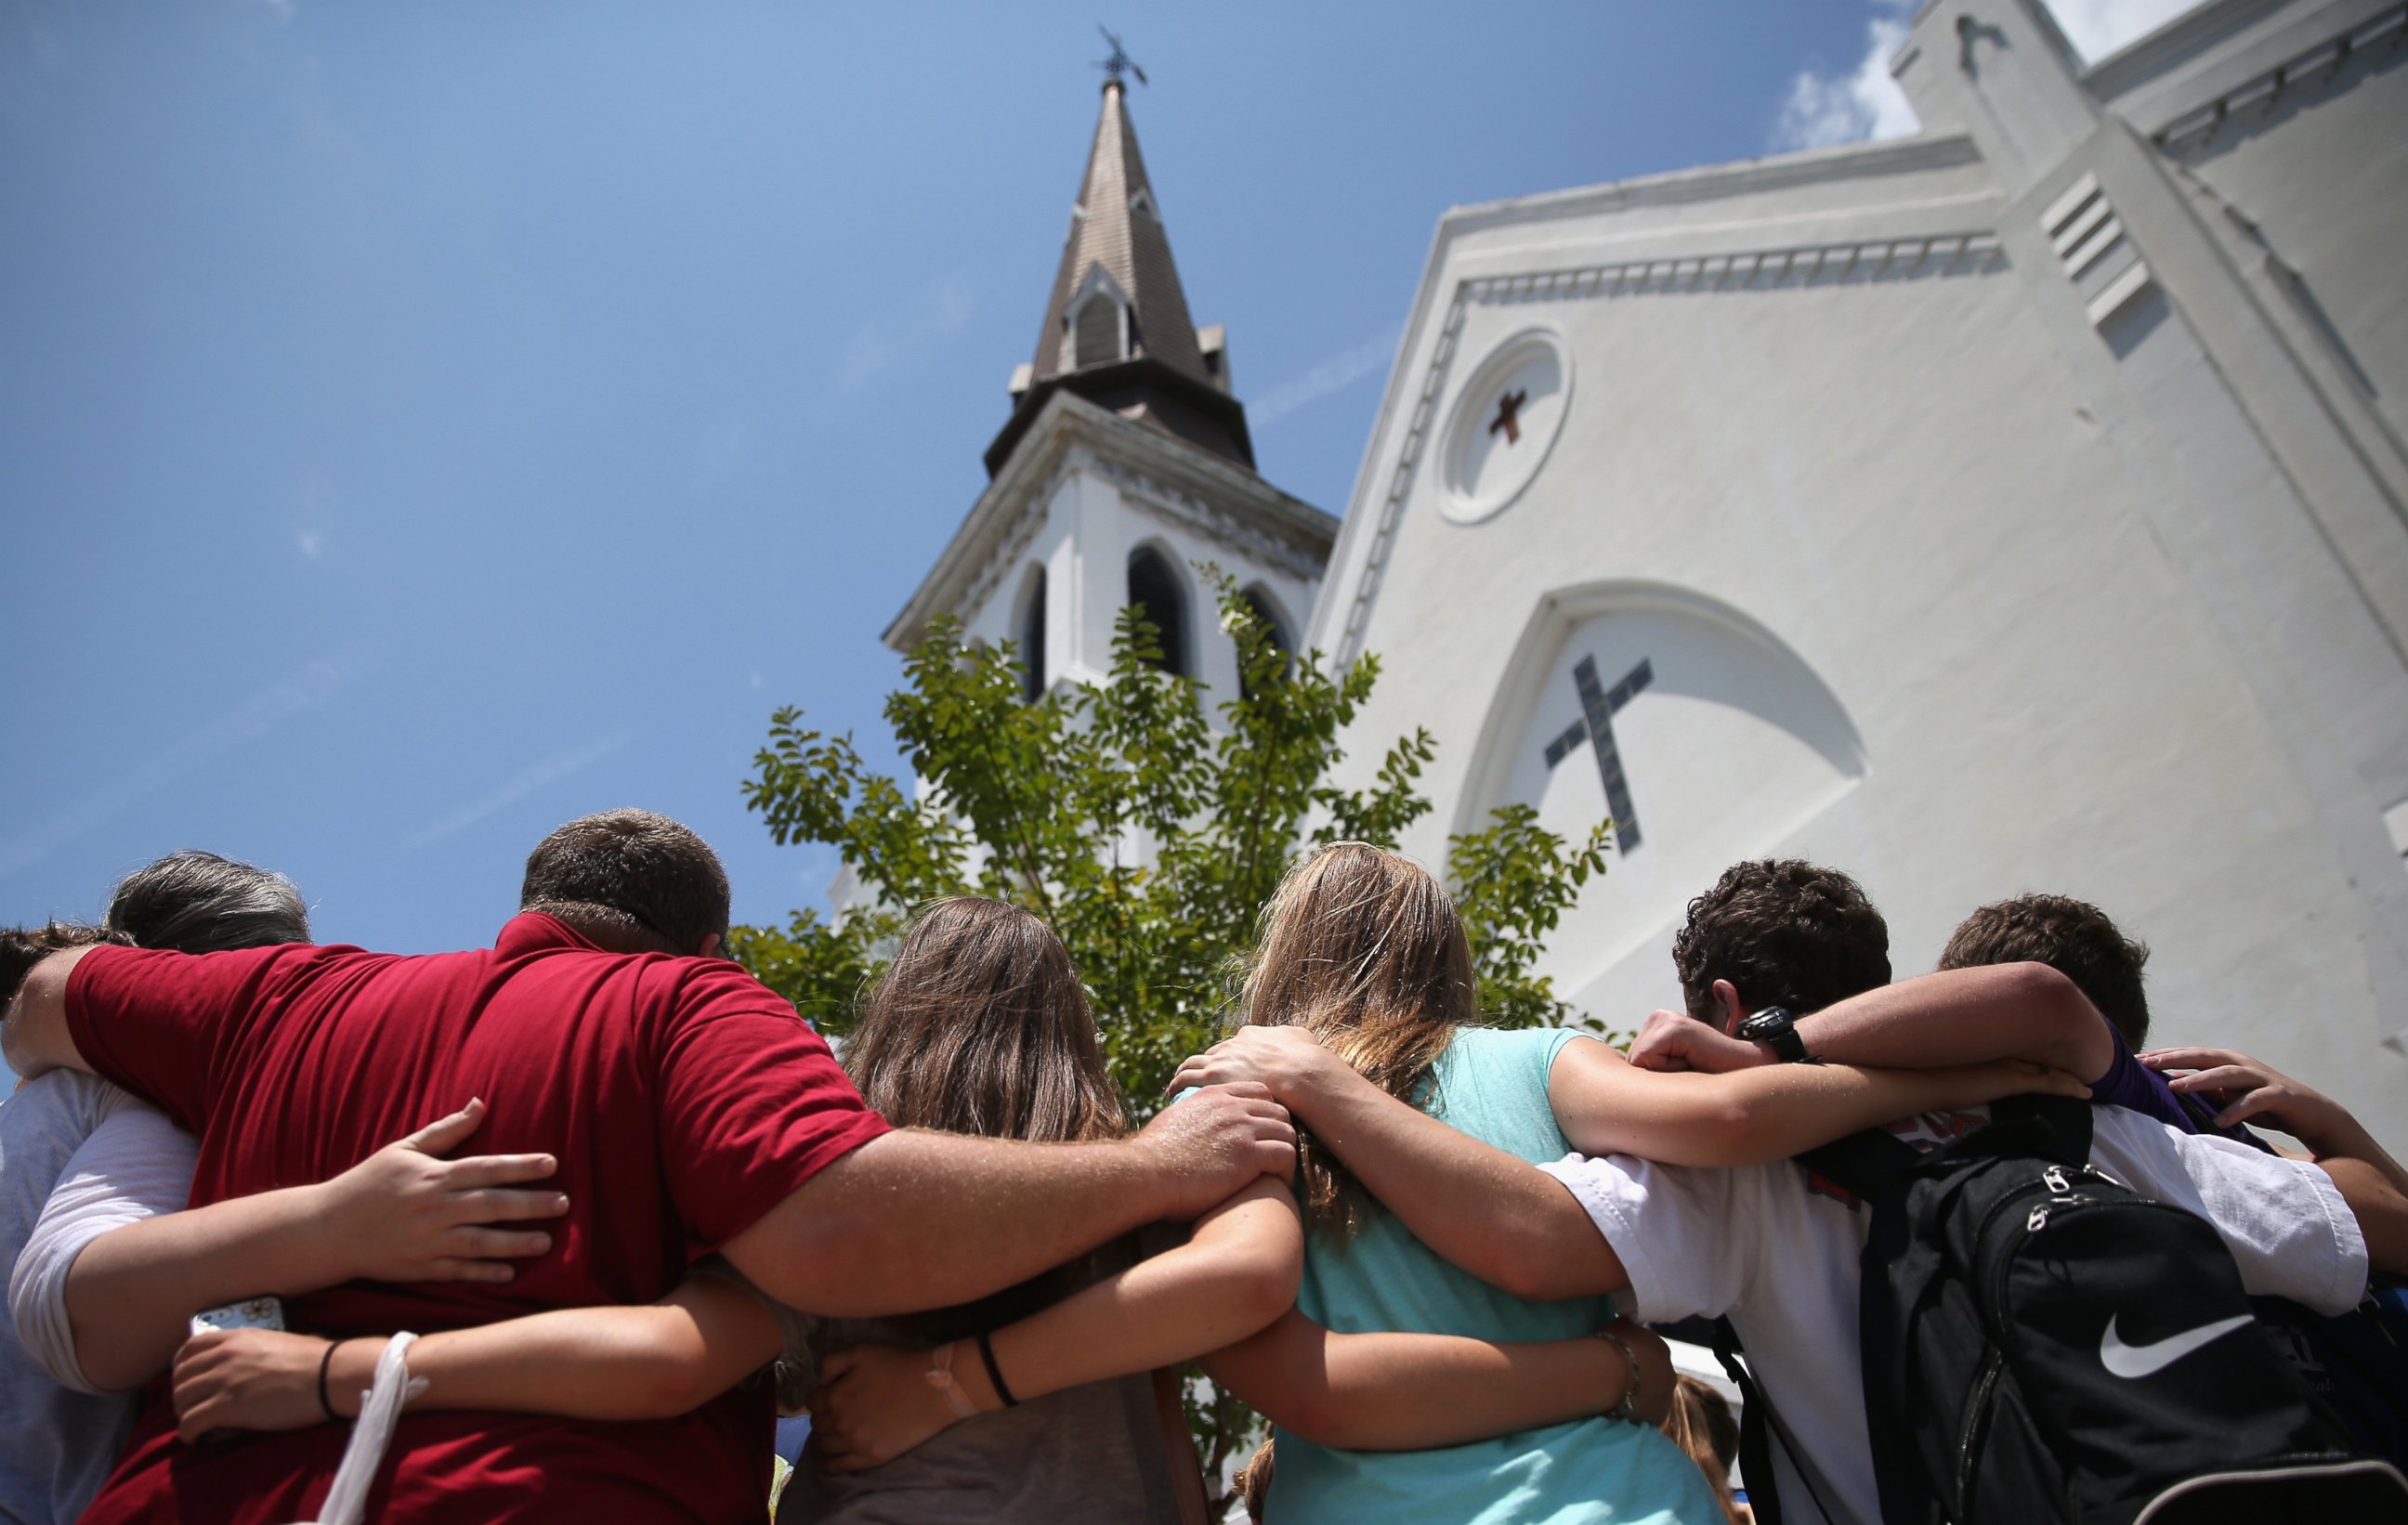 PHOTO: A church youth group from Dothan, Alabama prays in front of the Emanuel AME Church on the one-month anniversary of the mass shooting, July 17, 2015, in Charleston, S.C.